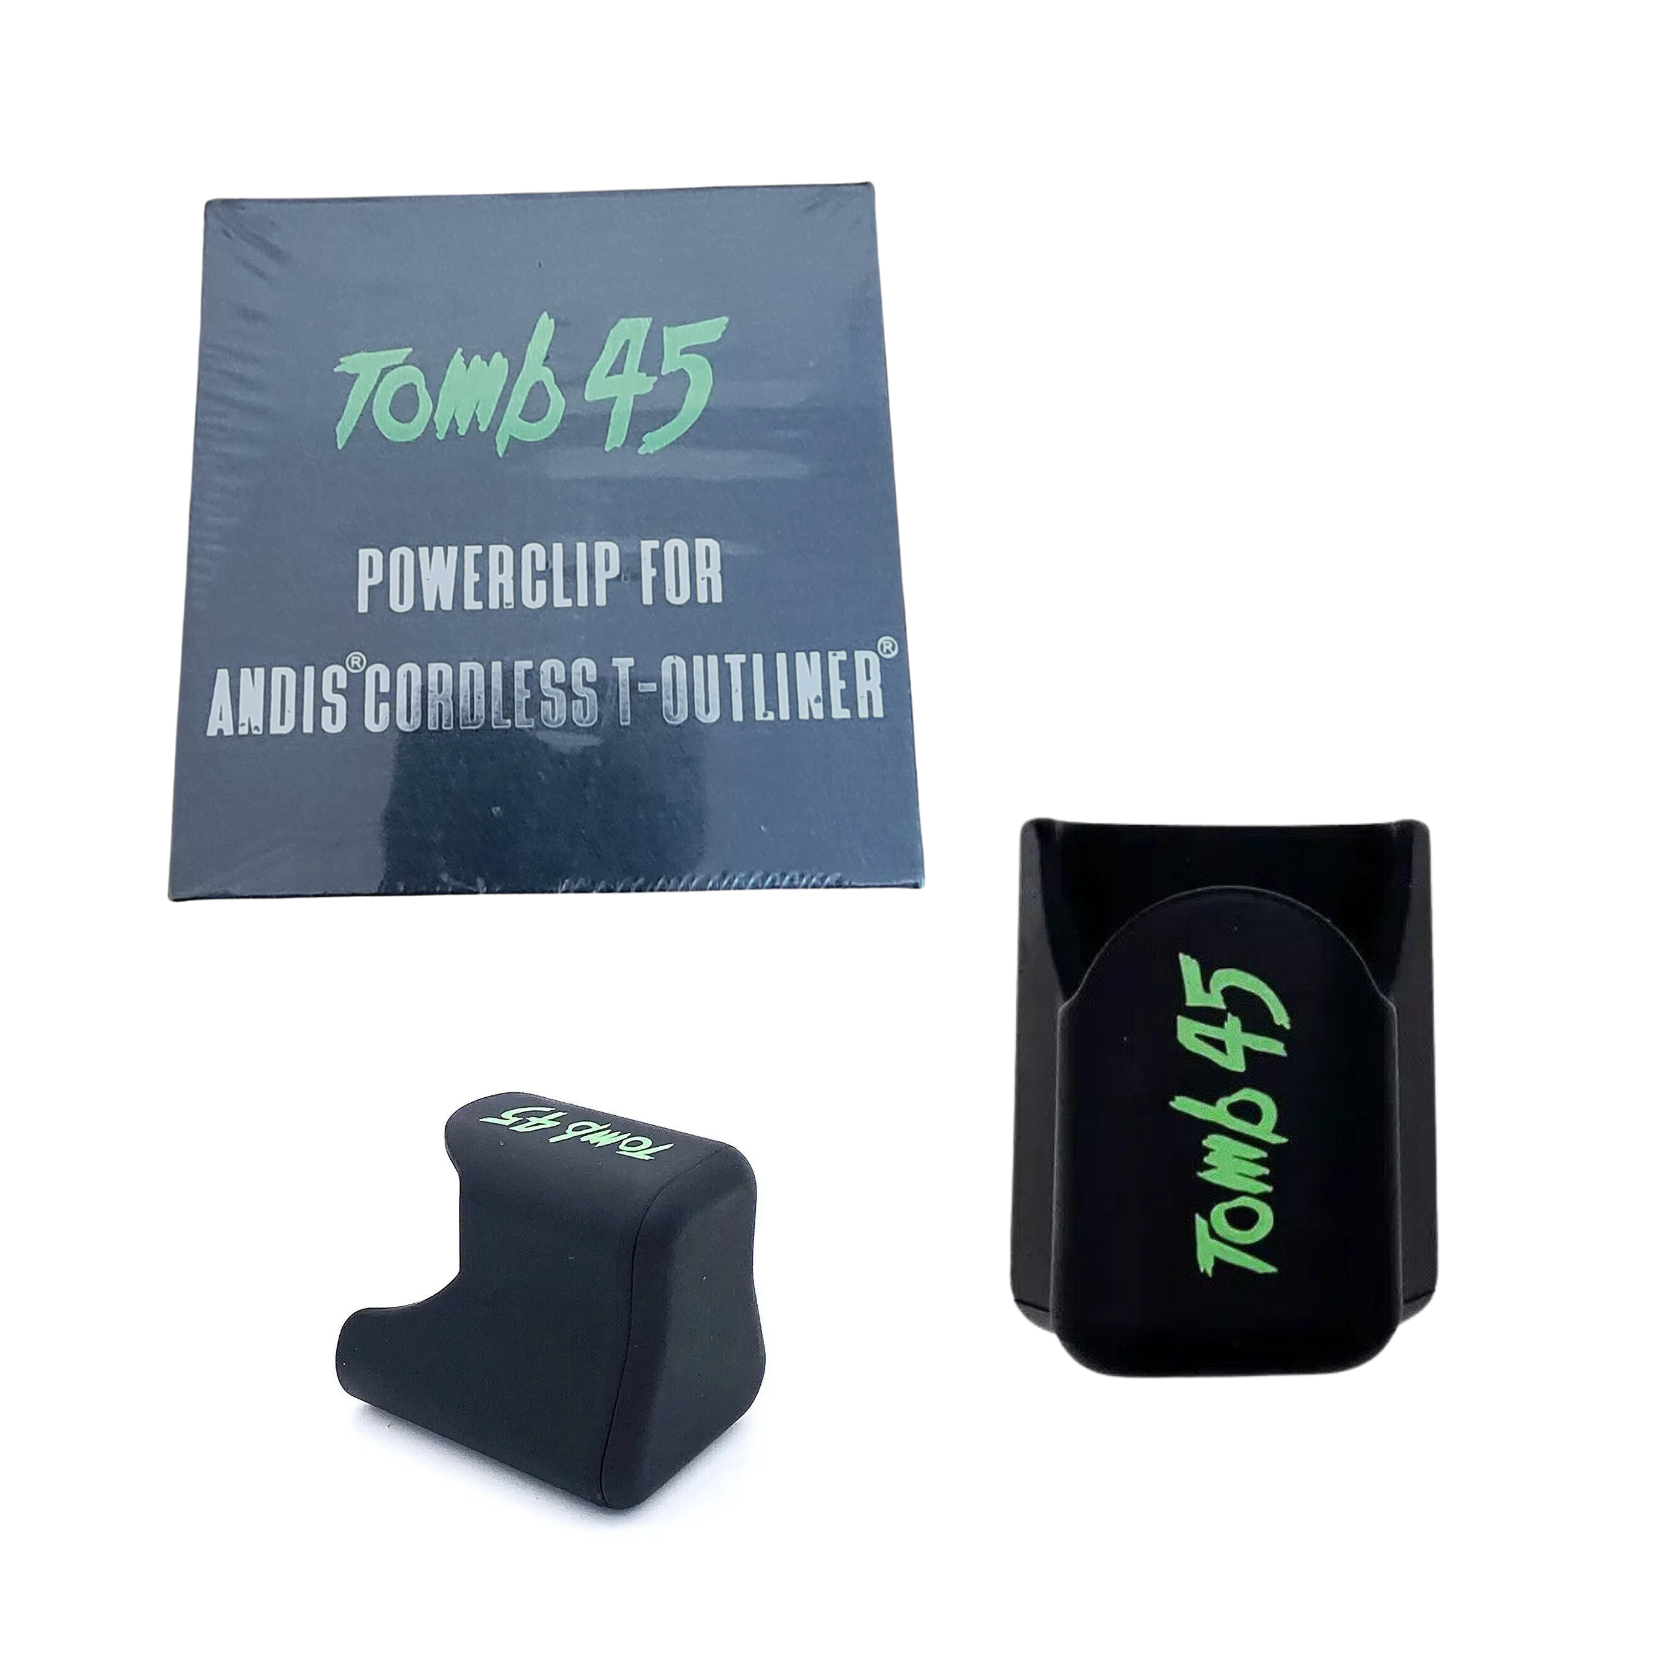 Tomb 45 PowerClip Wireless For Andis cordless T-Outliner Charging Adap